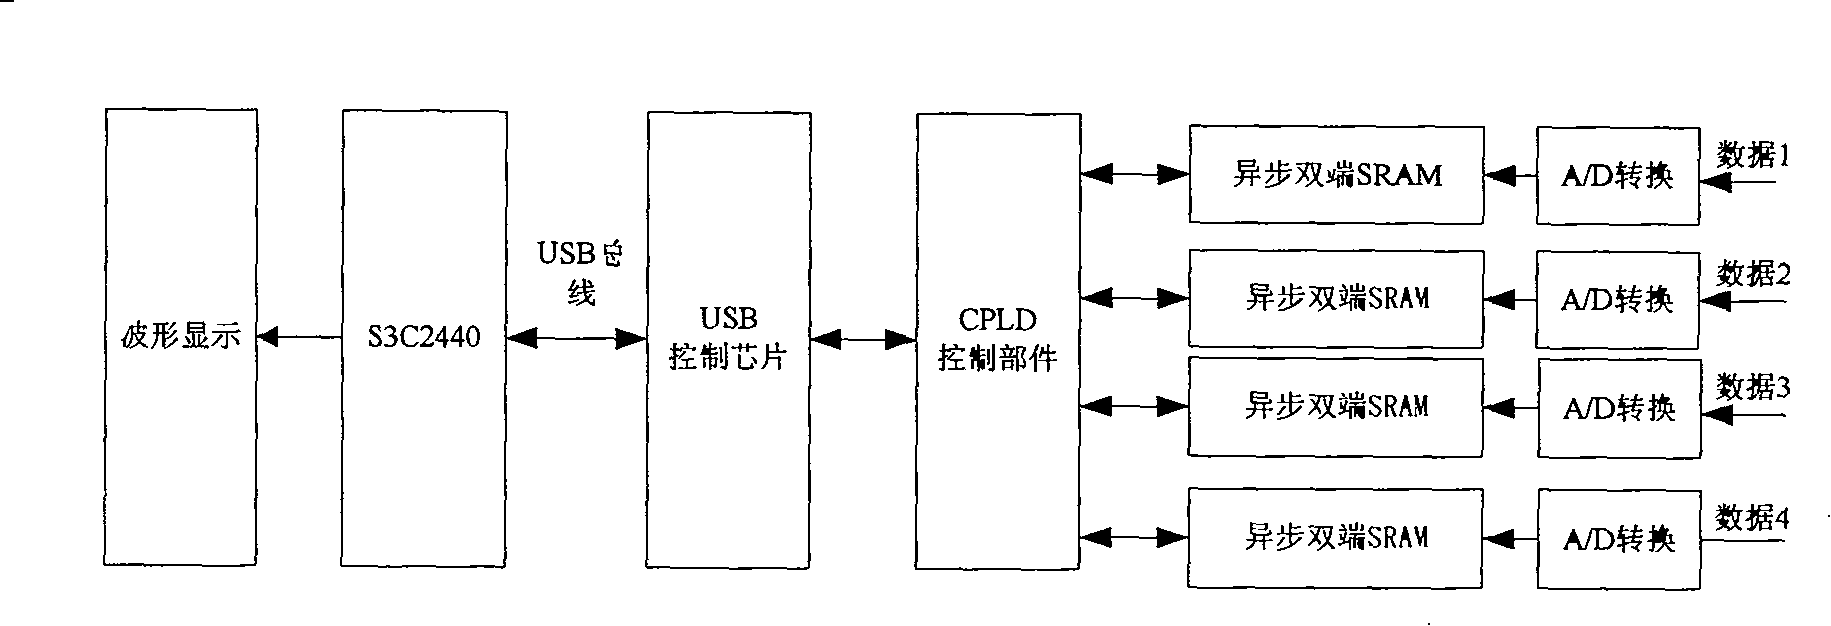 Signal processing method for USB bus based built-in virtual instrument